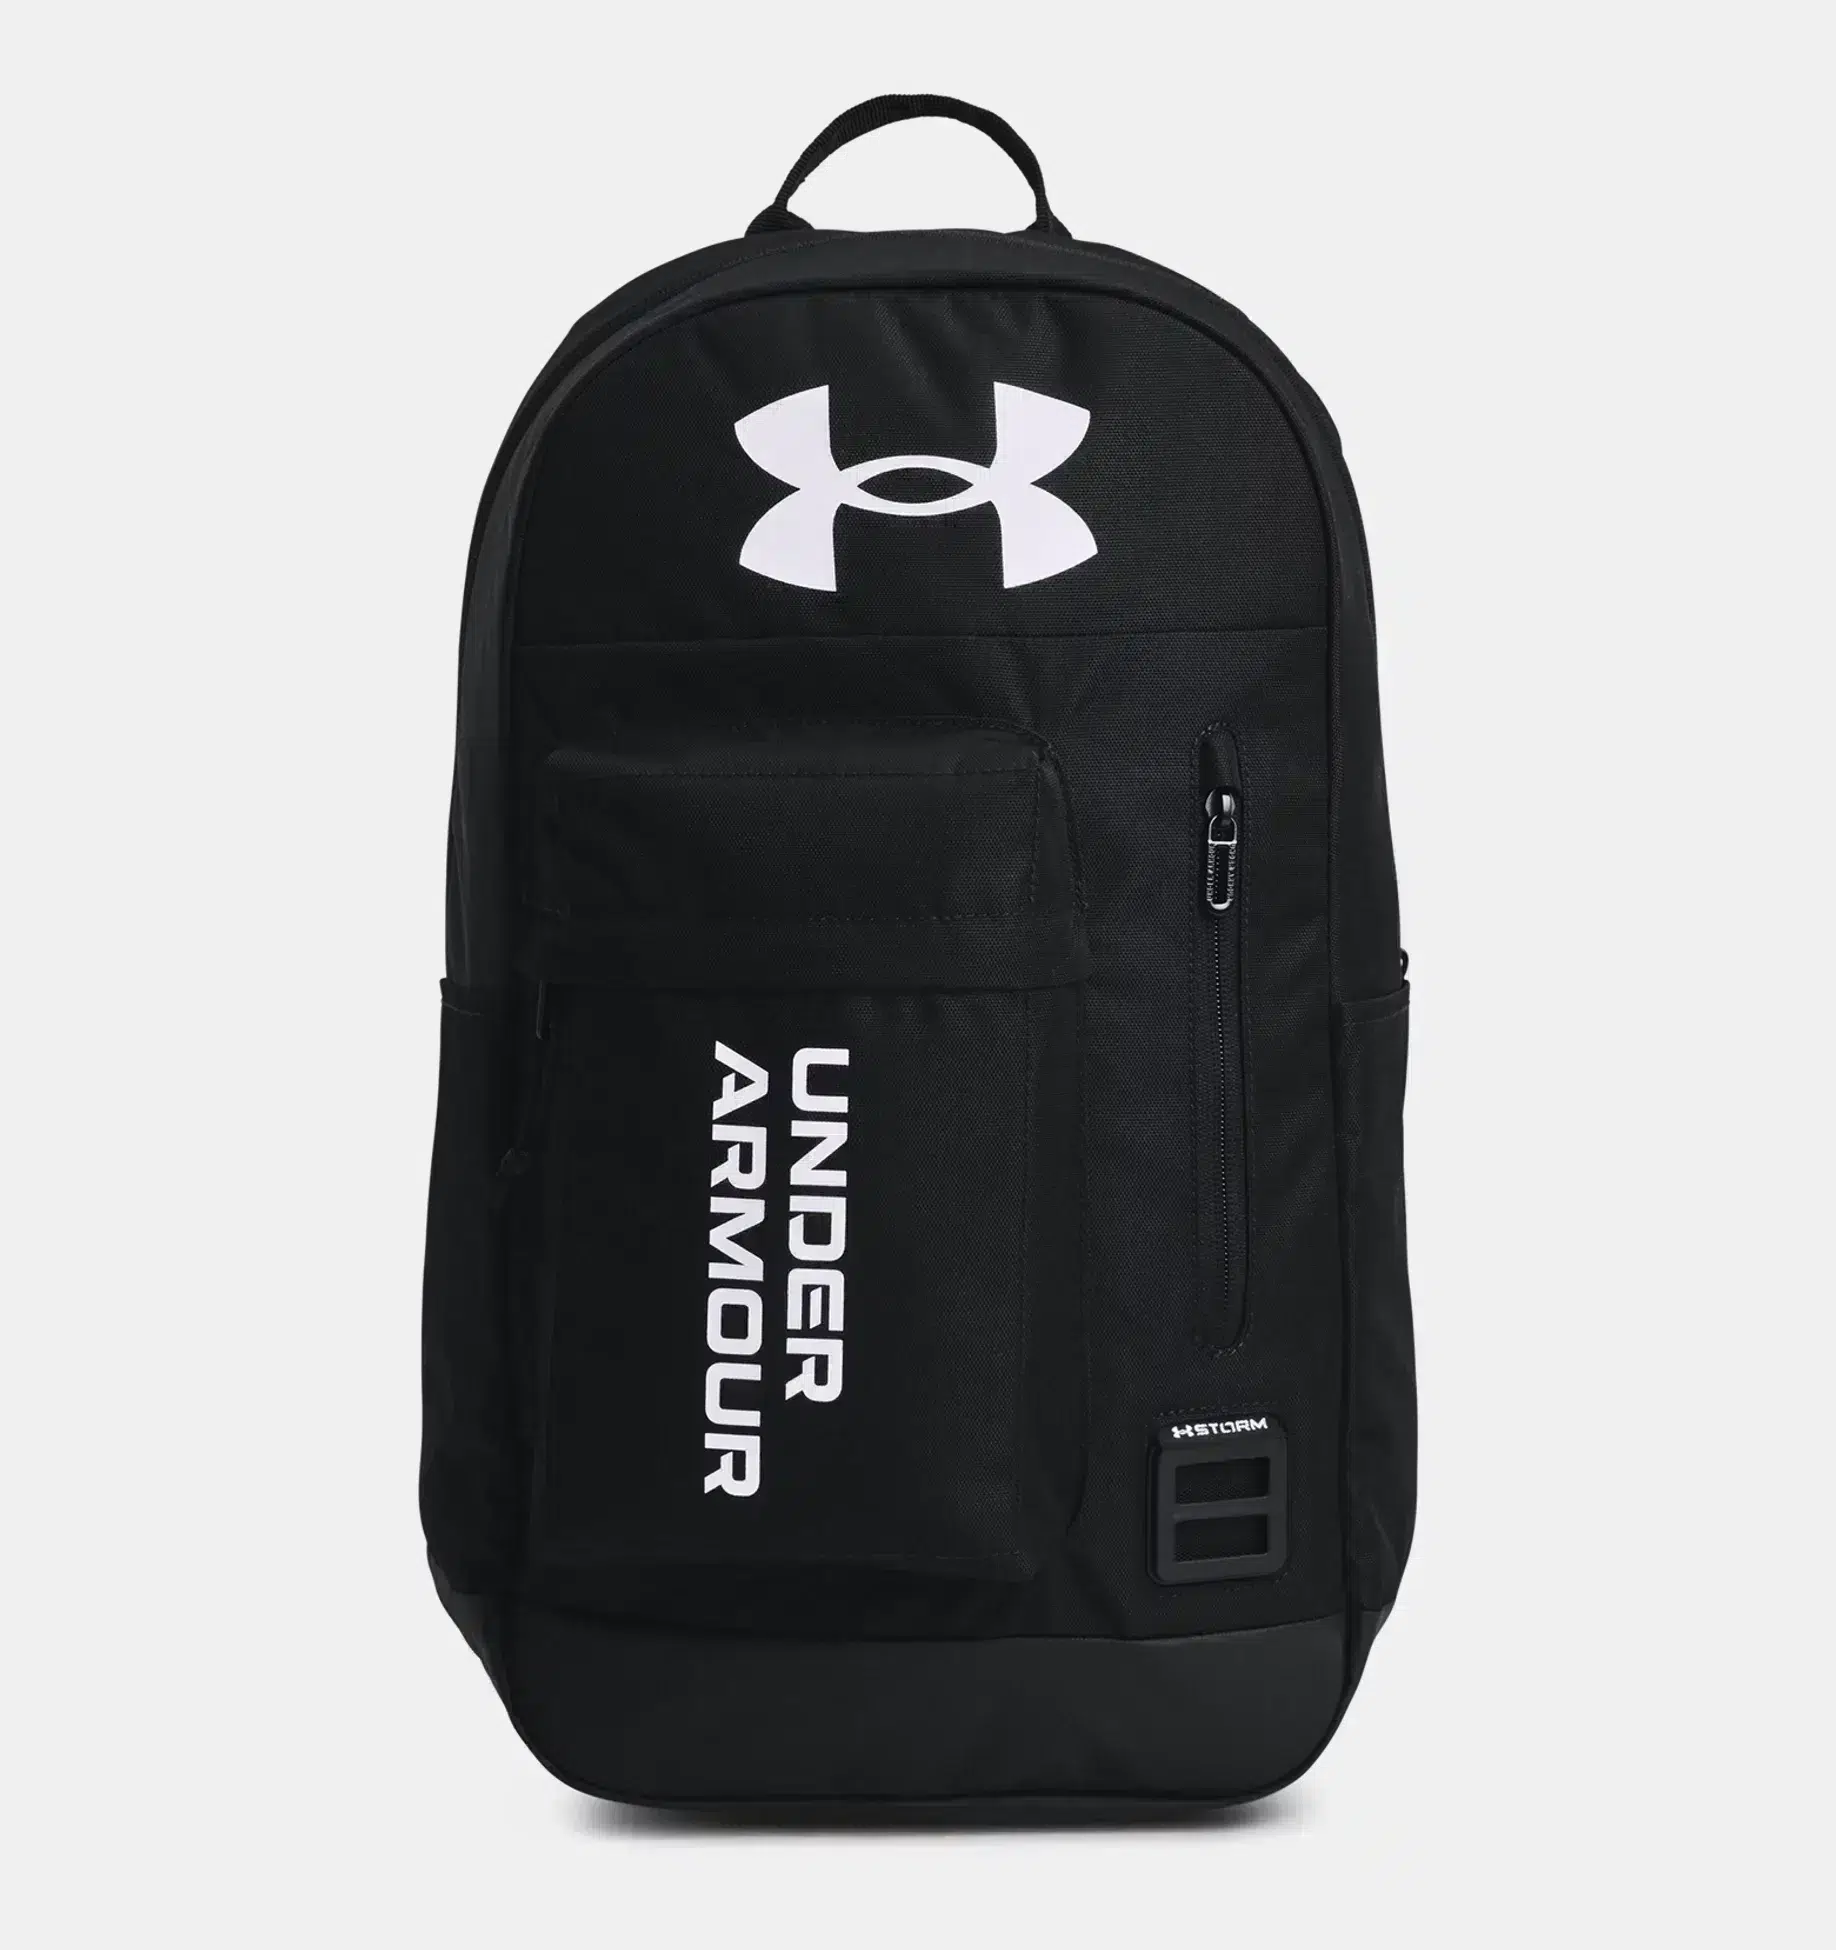 Under Armour - Halftime Backpack -  Black thumbnail